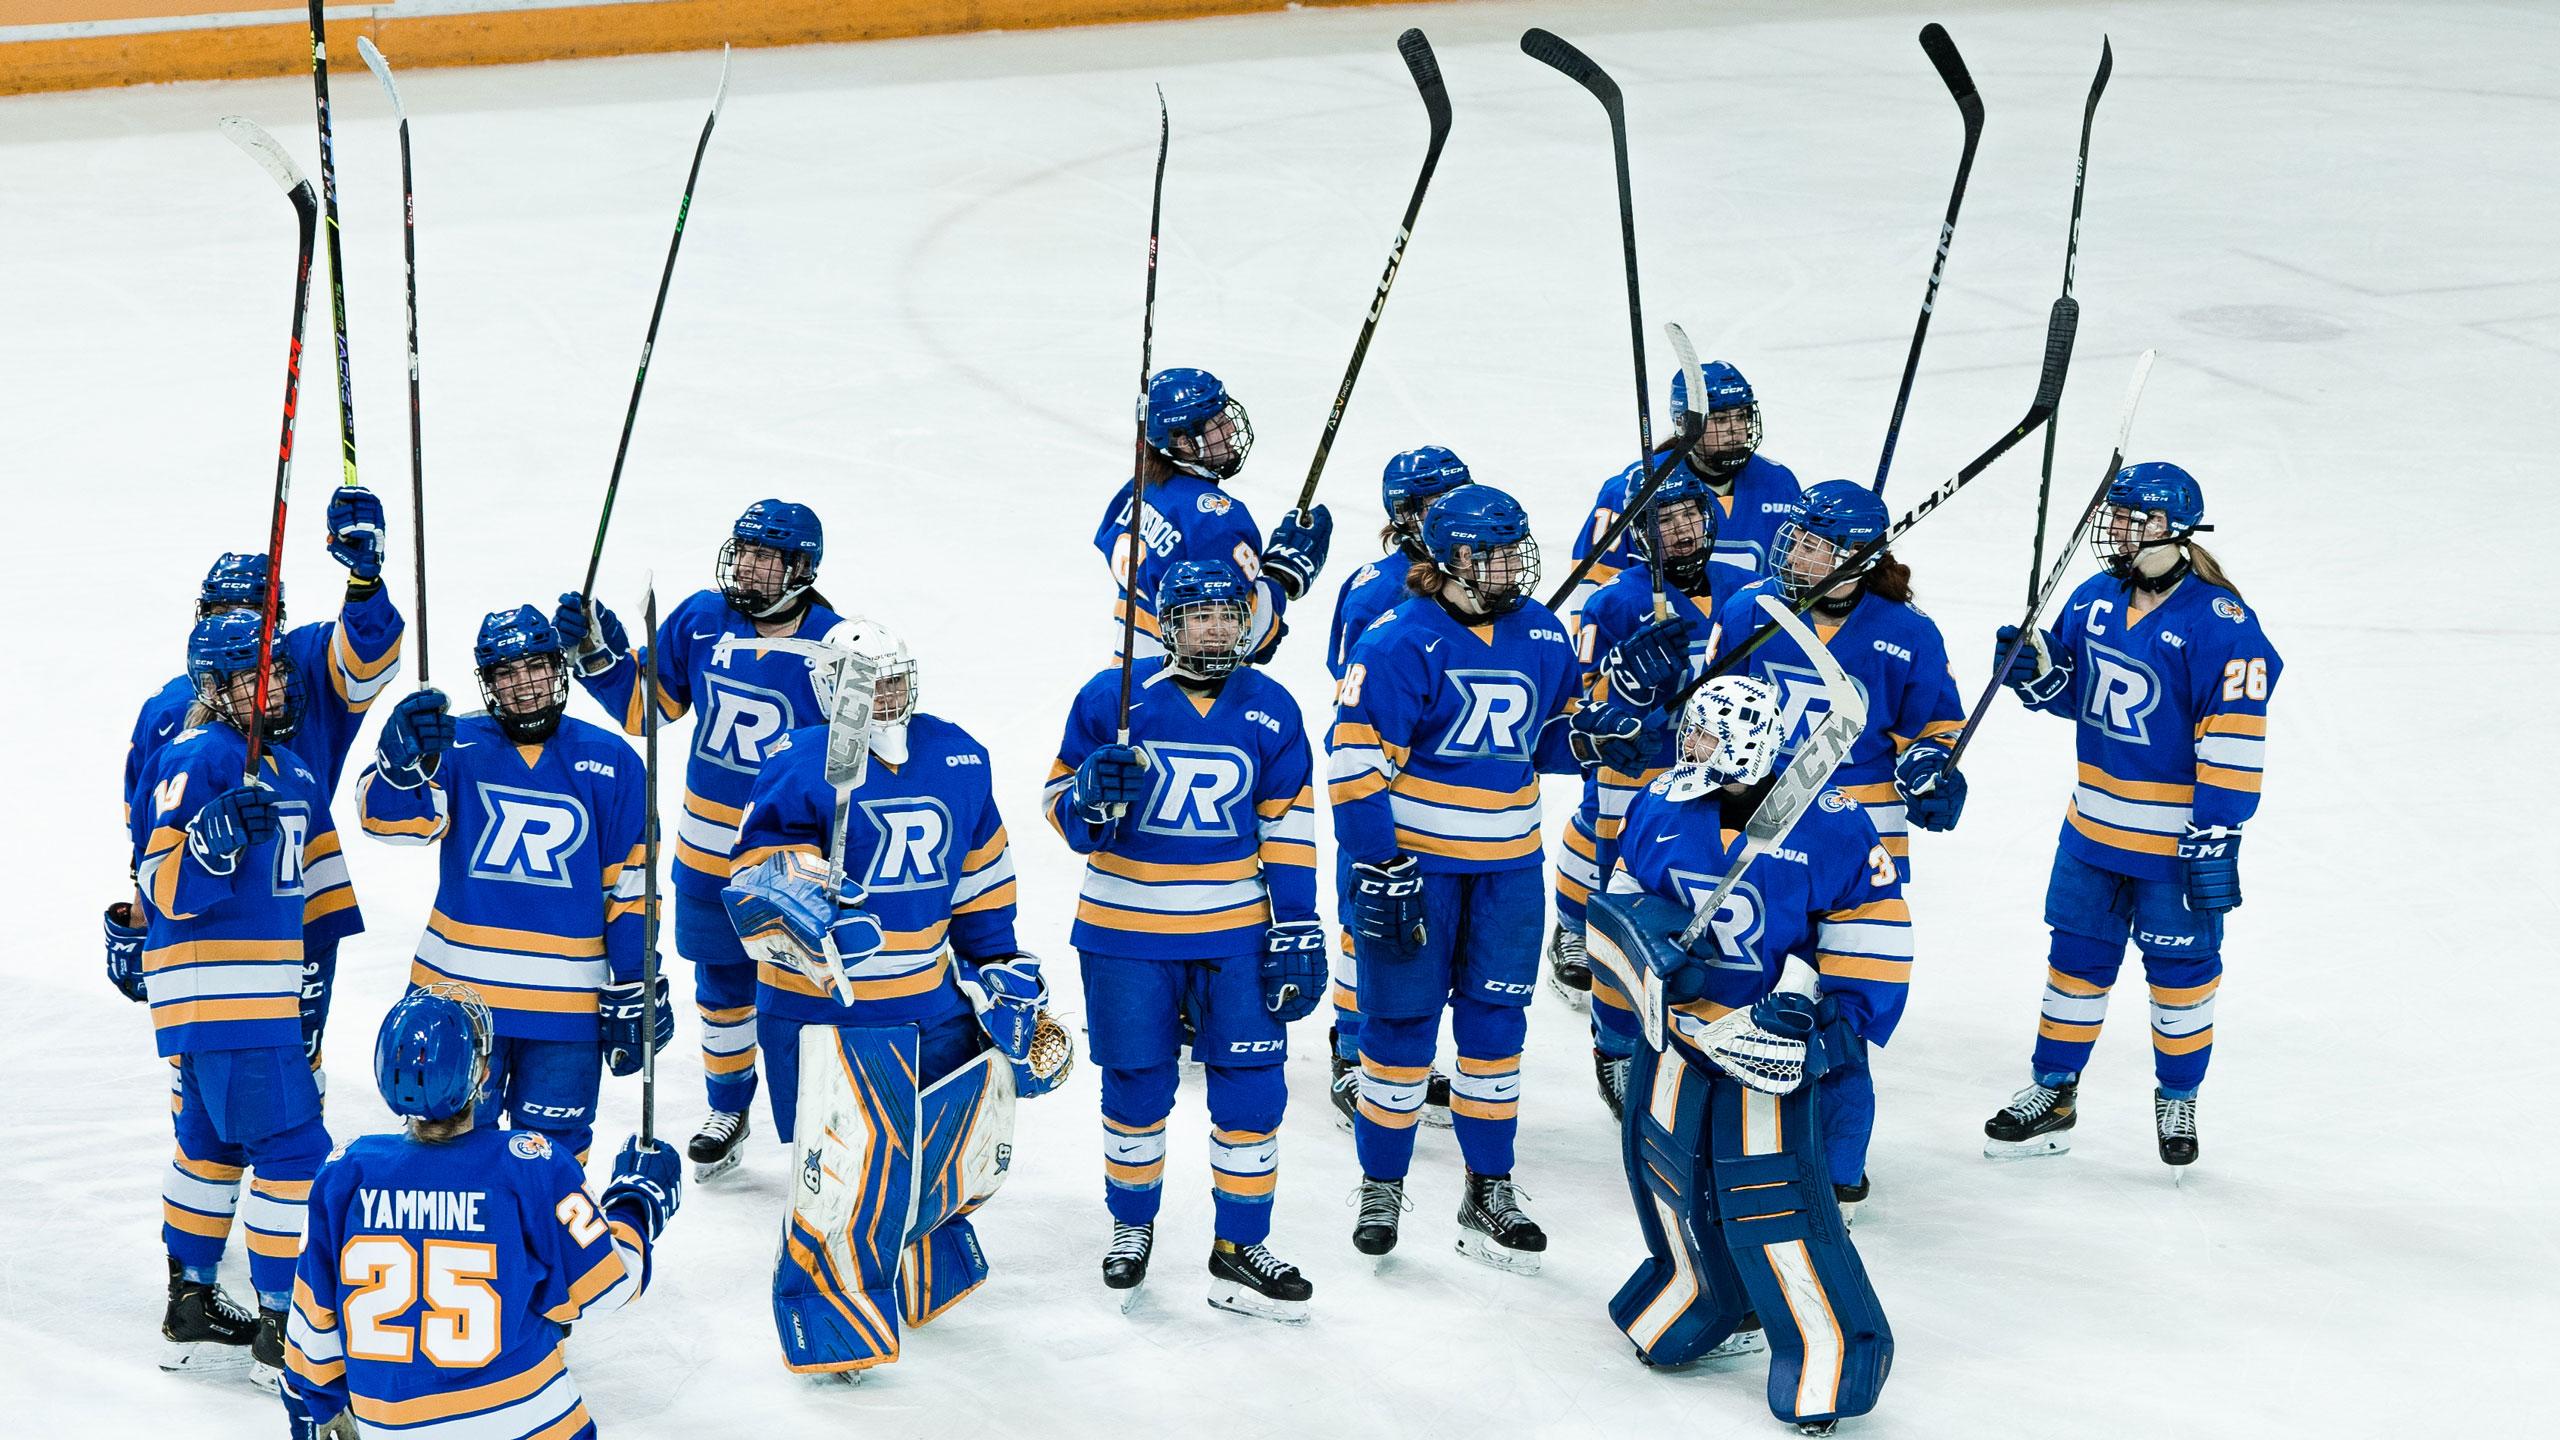 The TMU women's hockey players in blue jerseys stick their sticks in the air following a win